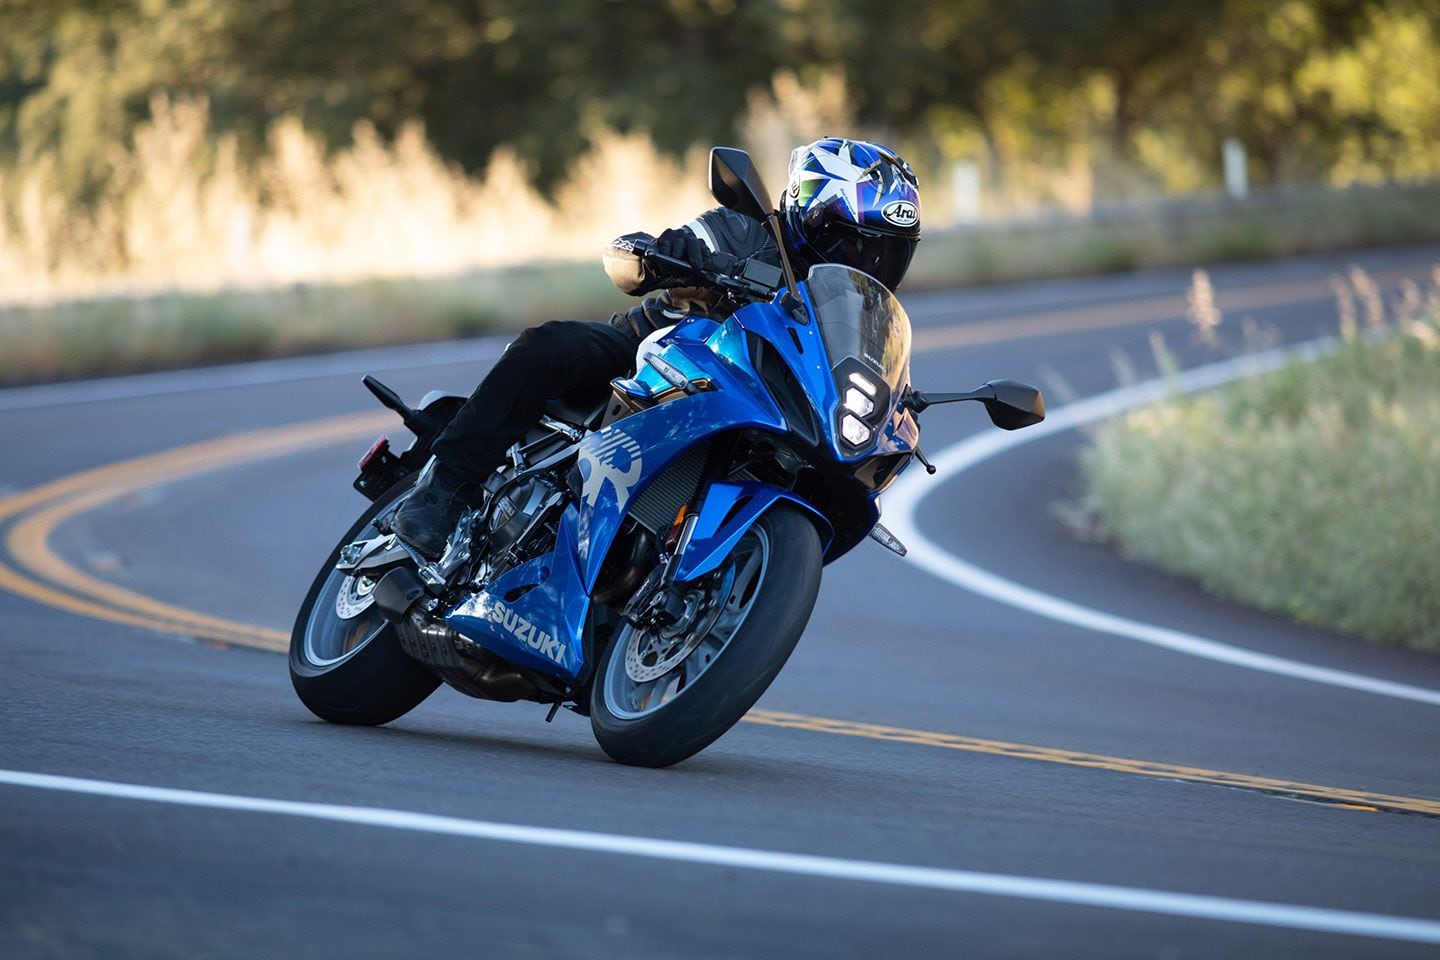 As anticipated, another new model based on Suzuki’s 776cc parallel-twin platform has arrived in the form of the GSX-8R.